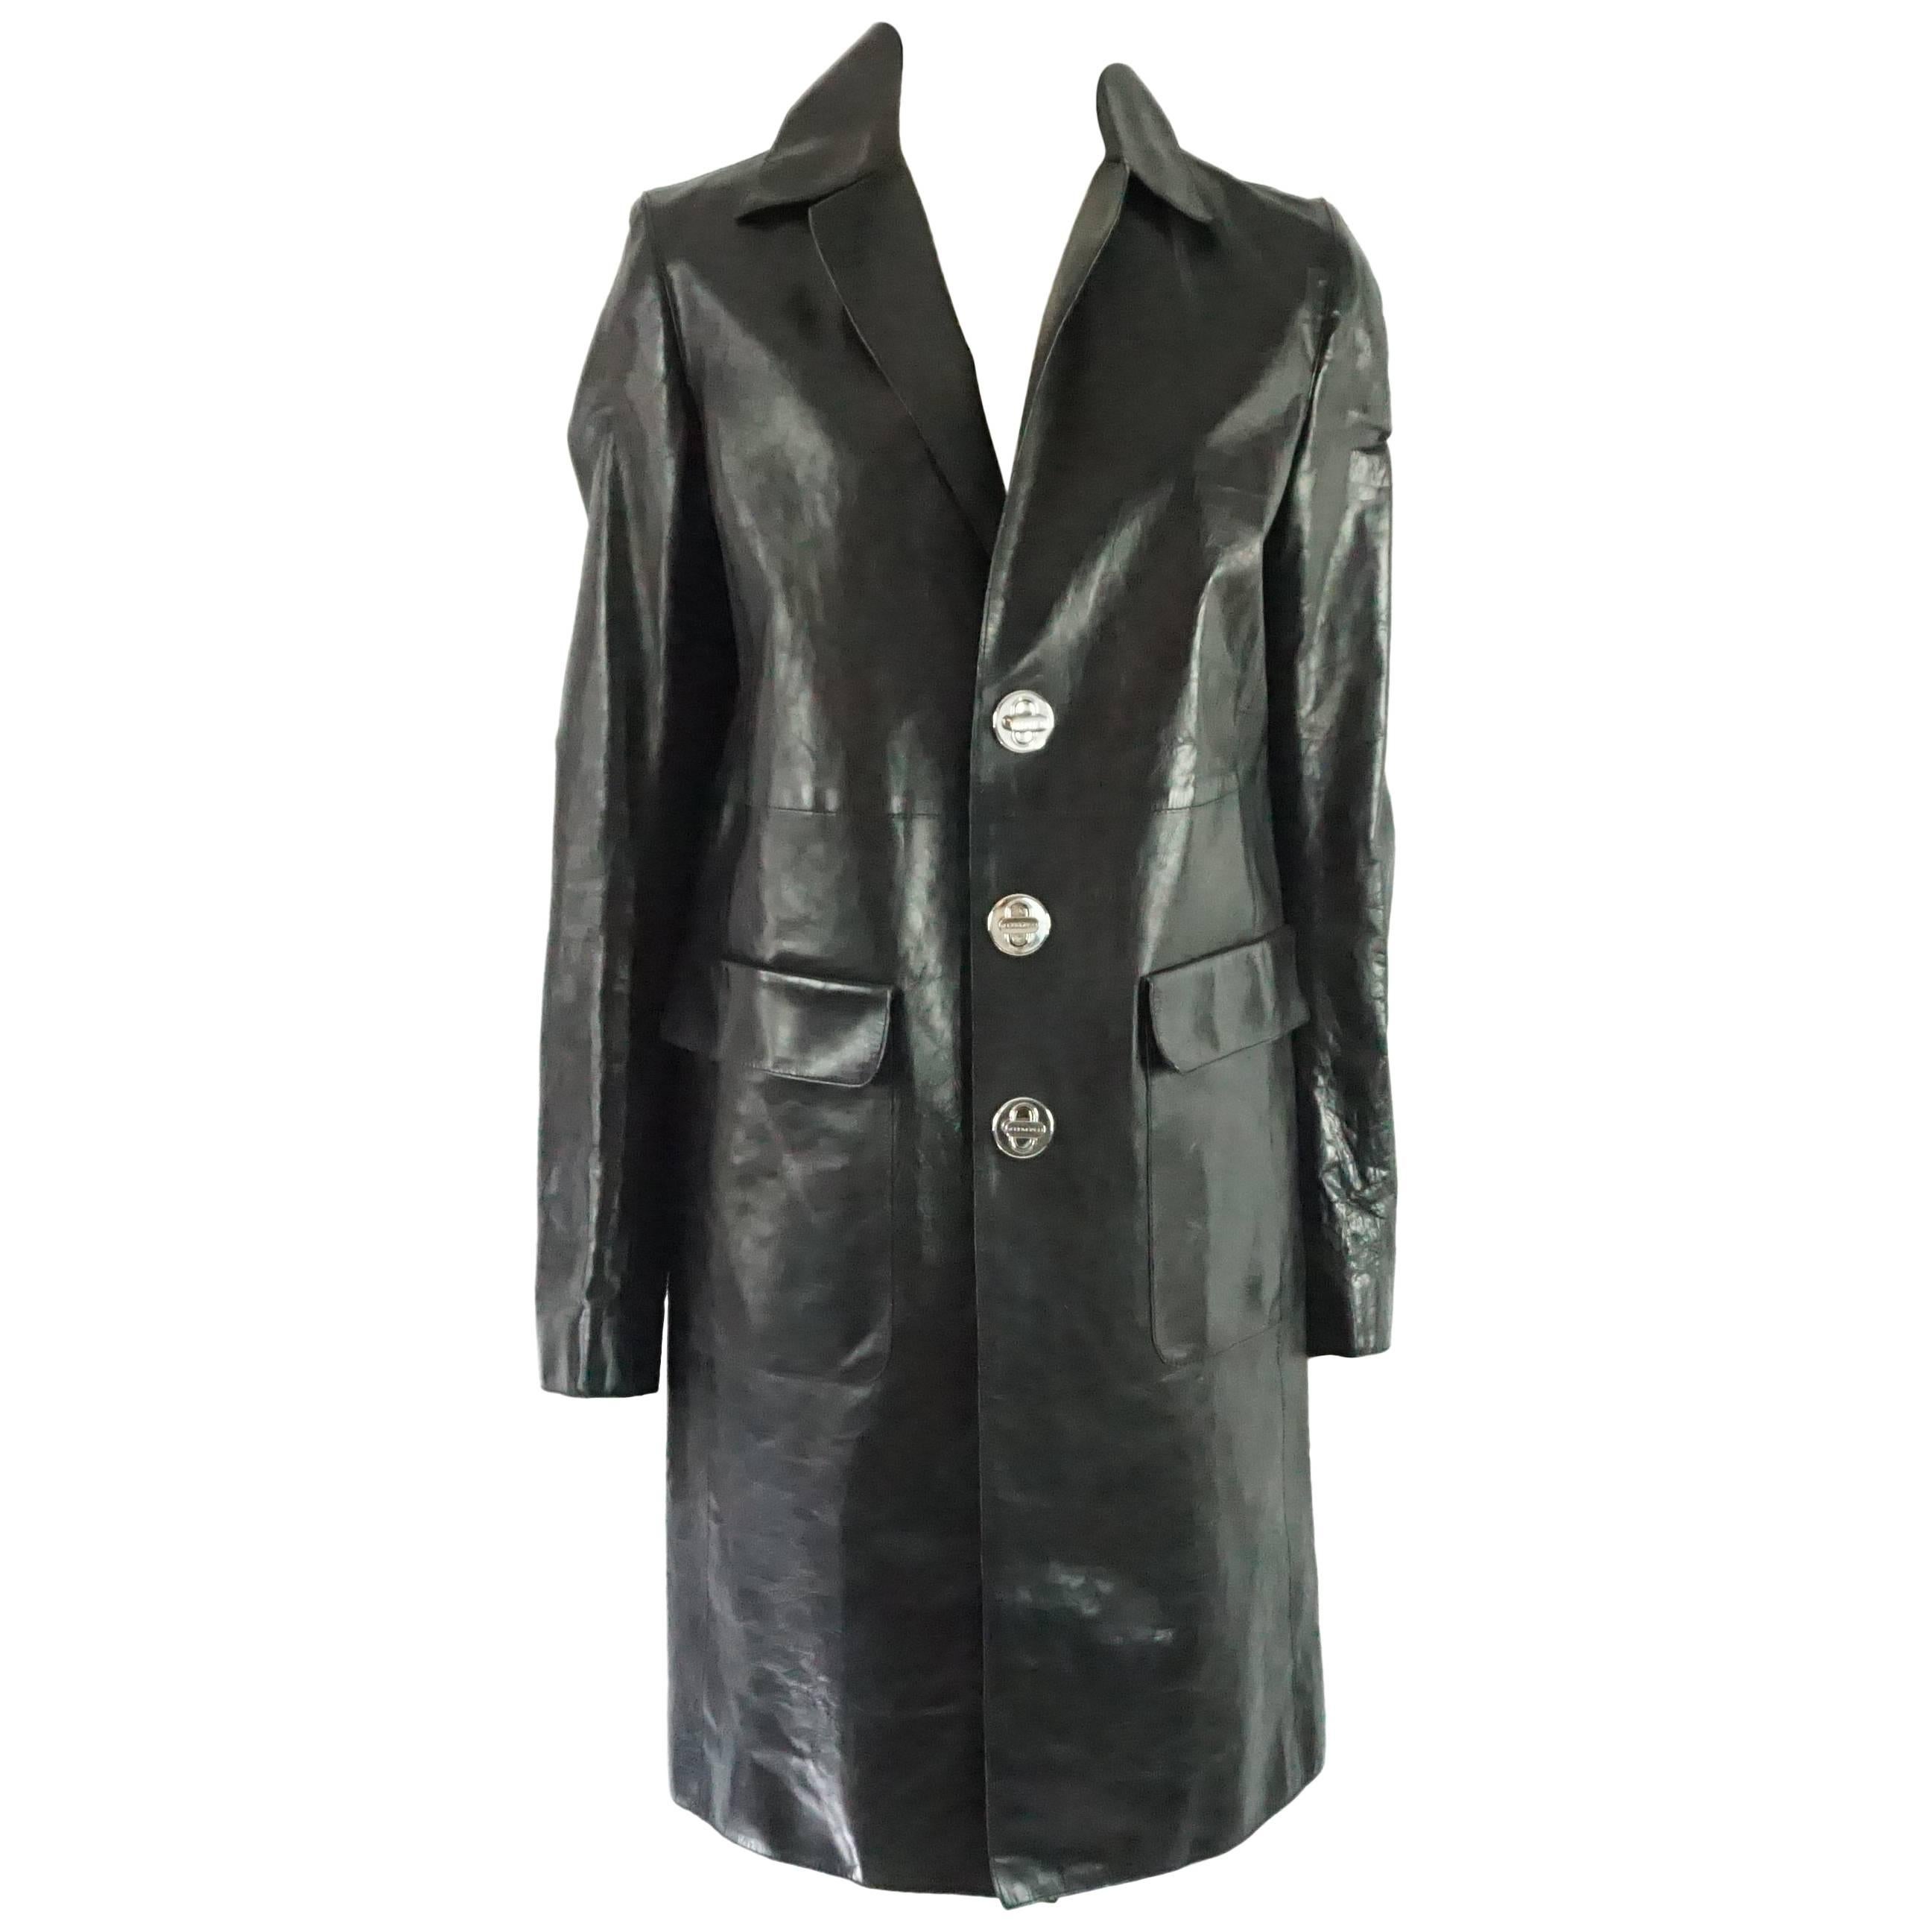 DSquared2 Black Leather Trench Style Full Coat - 46